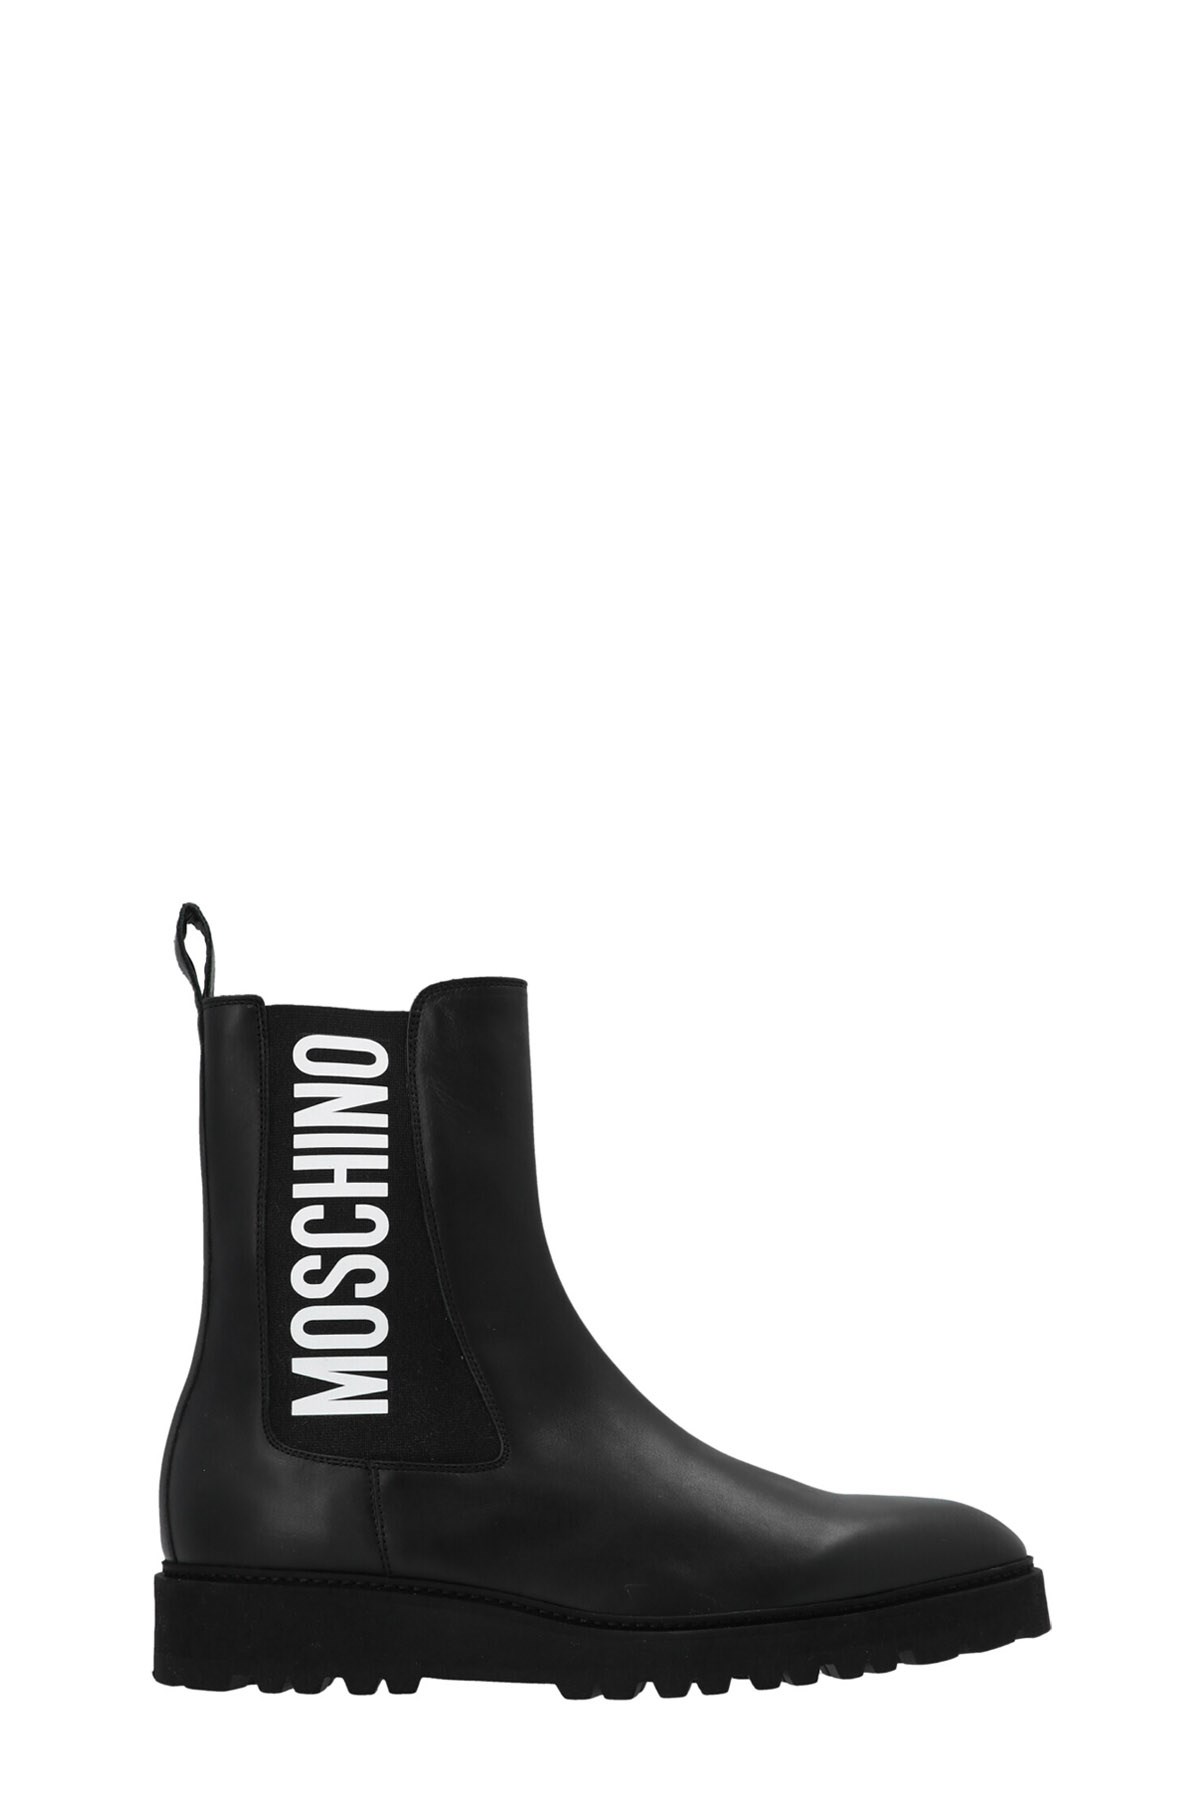 MOSCHINO 'Label’ Snkle Boots